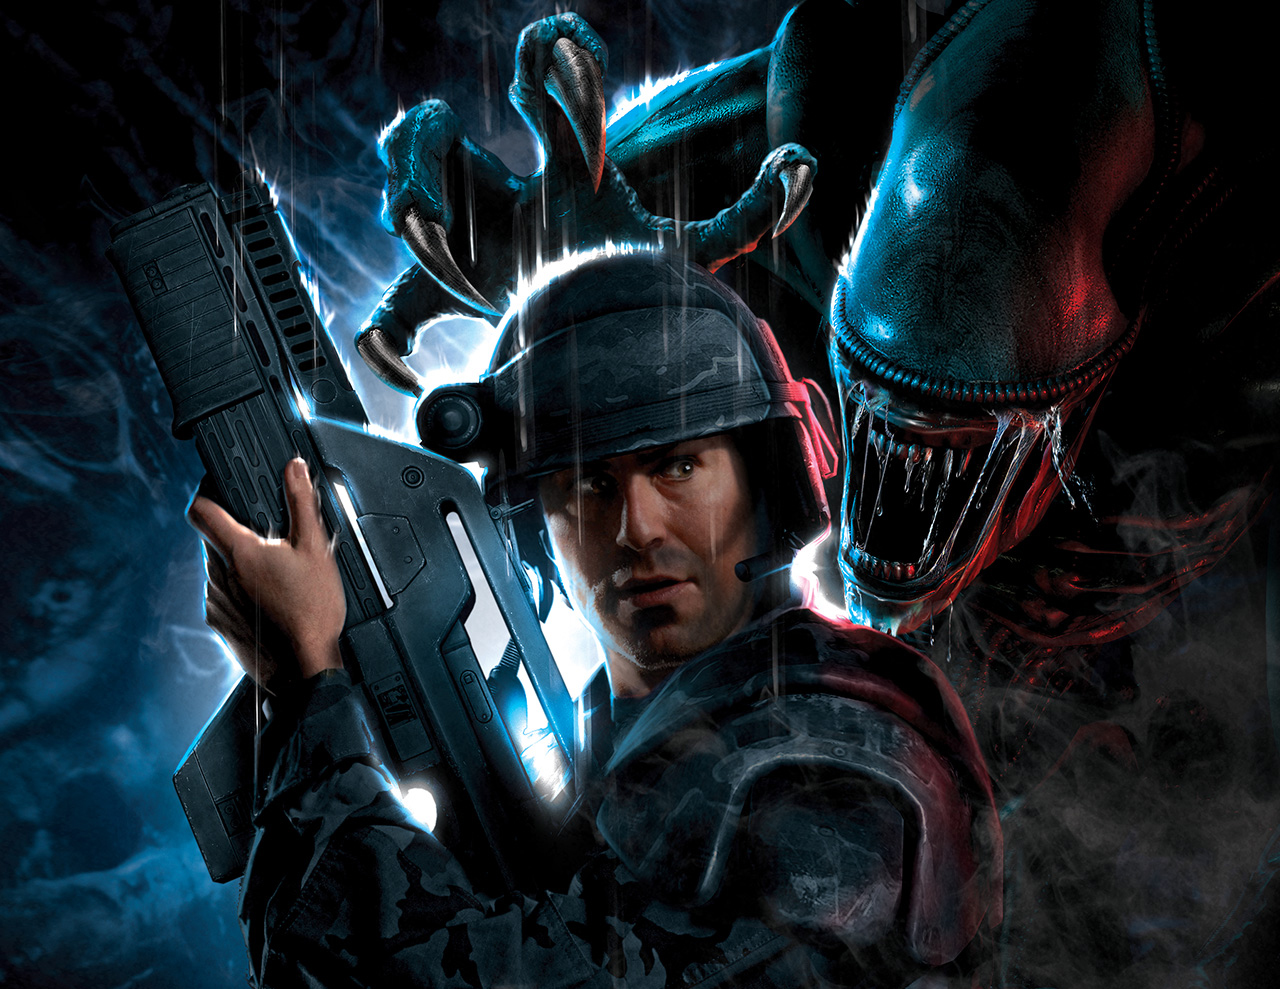 Cold Iron Studios Alien Game is a “Massively Multiplayer Online Shooter”